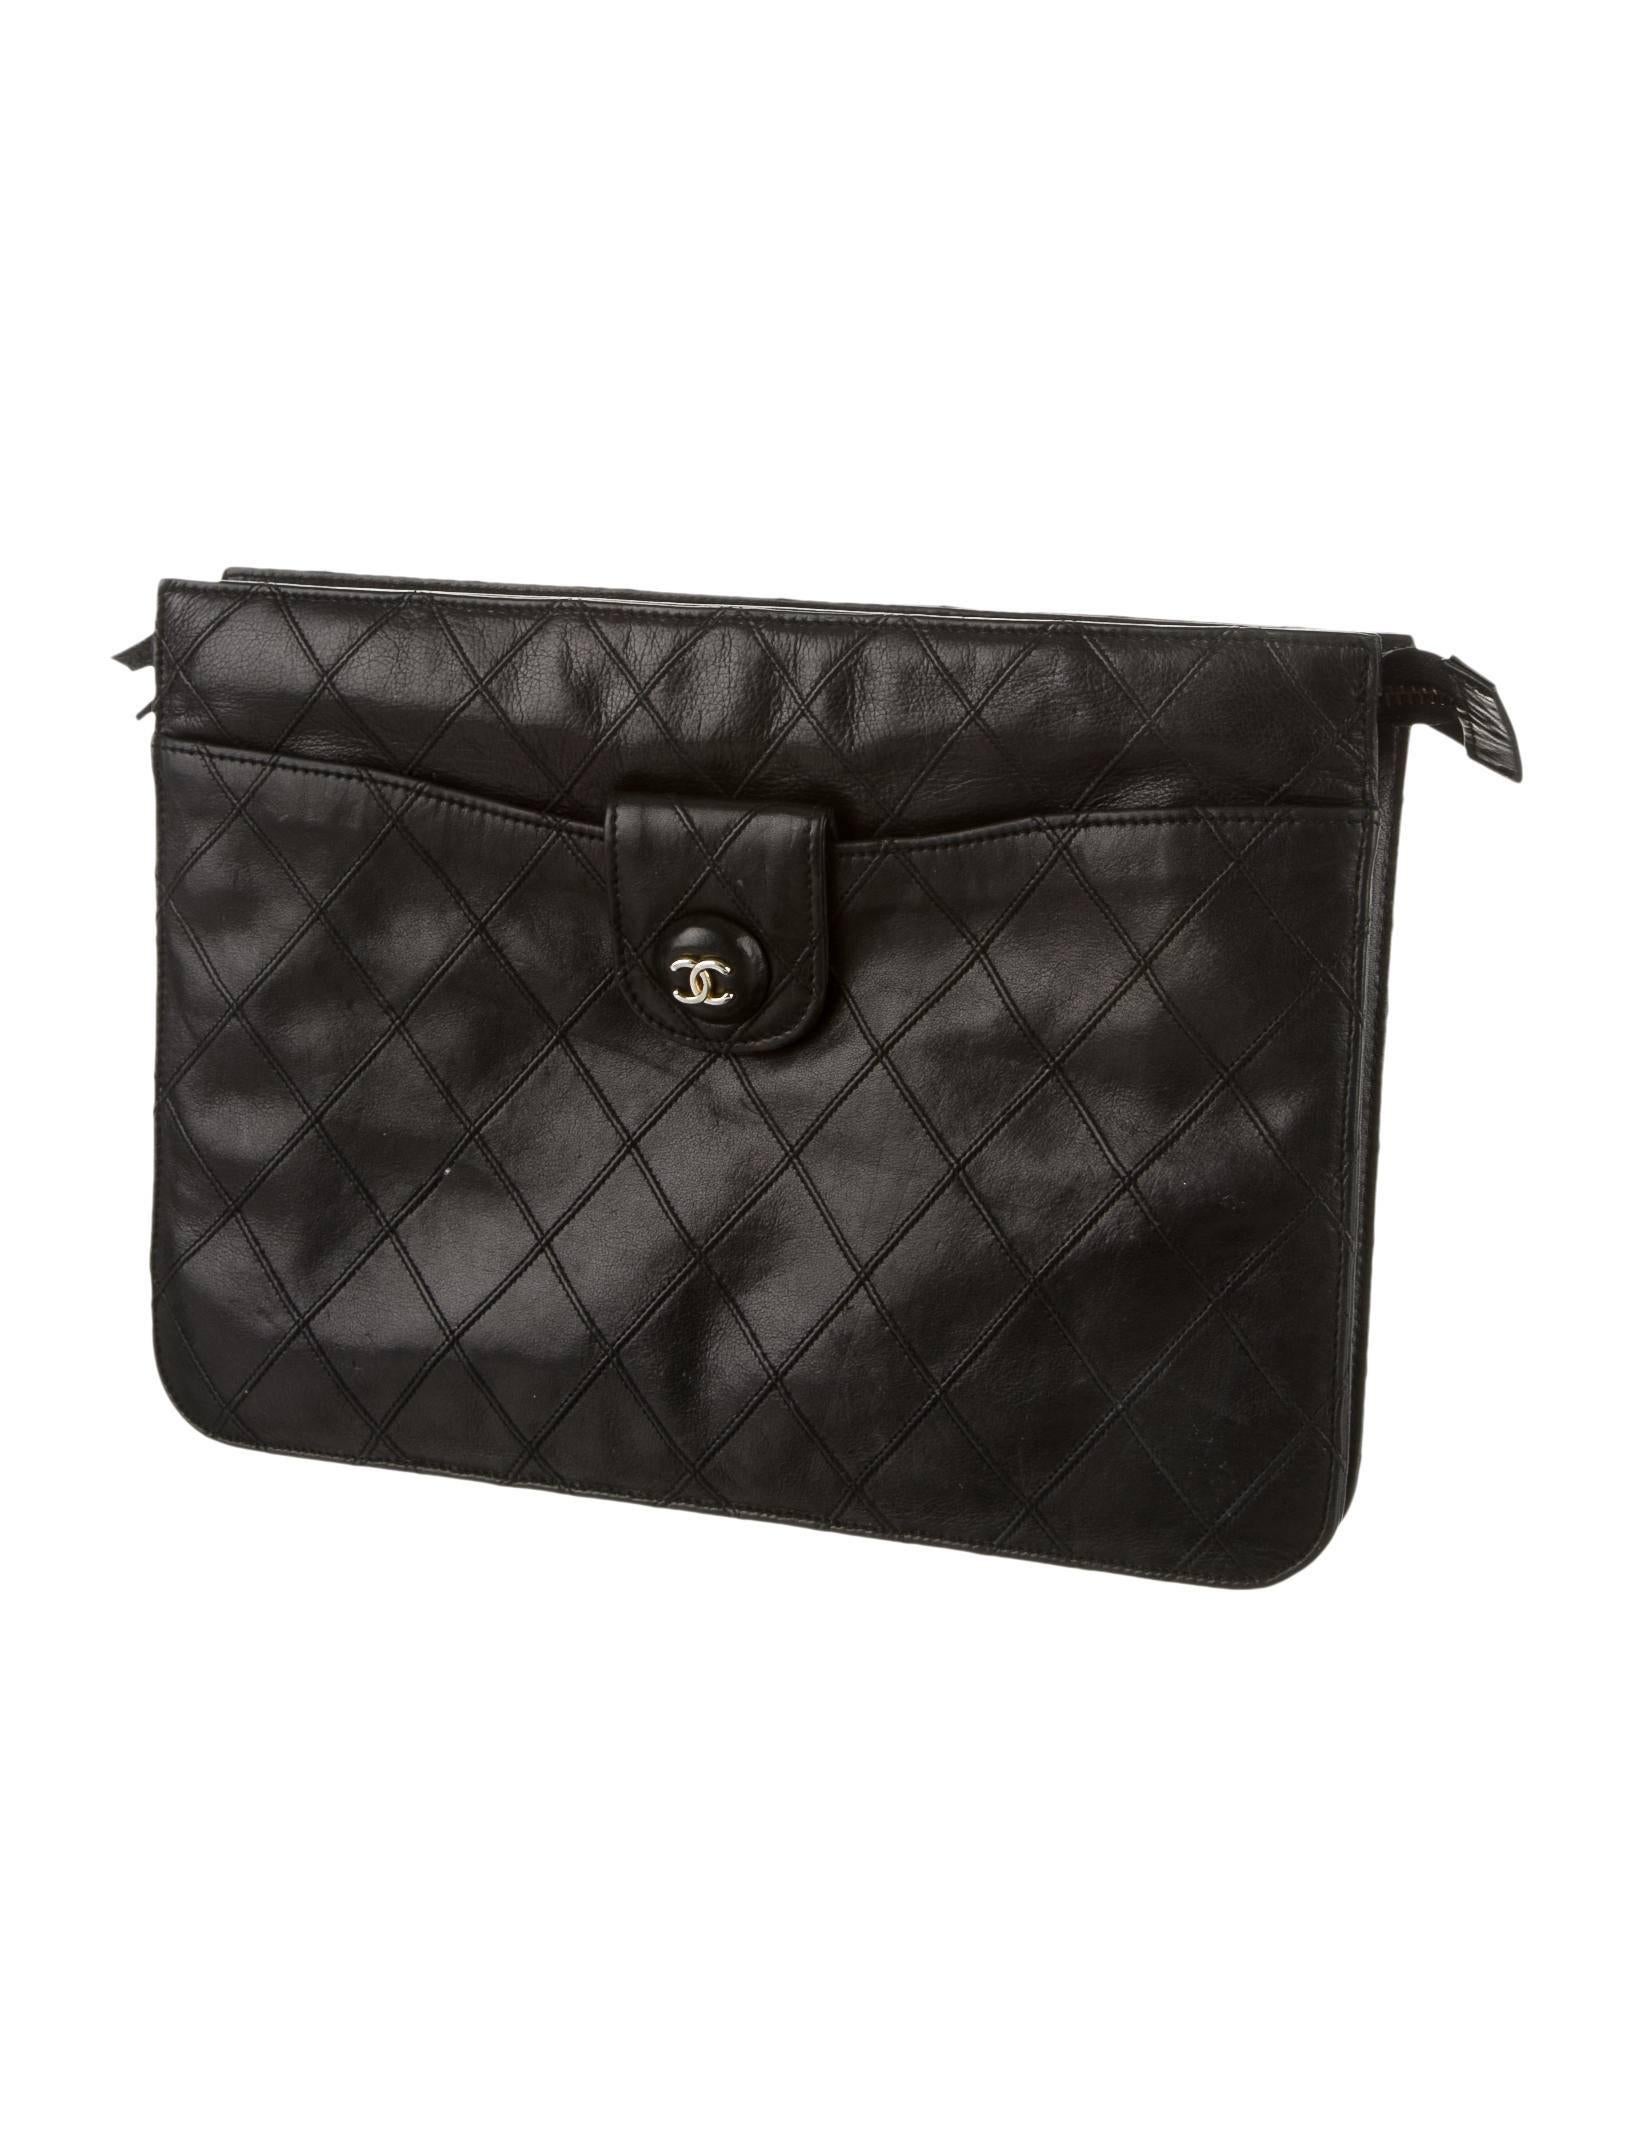 Chanel Black Quilted Leather Silver Hardware Envelope Evening Bag Clutch In Good Condition In Chicago, IL